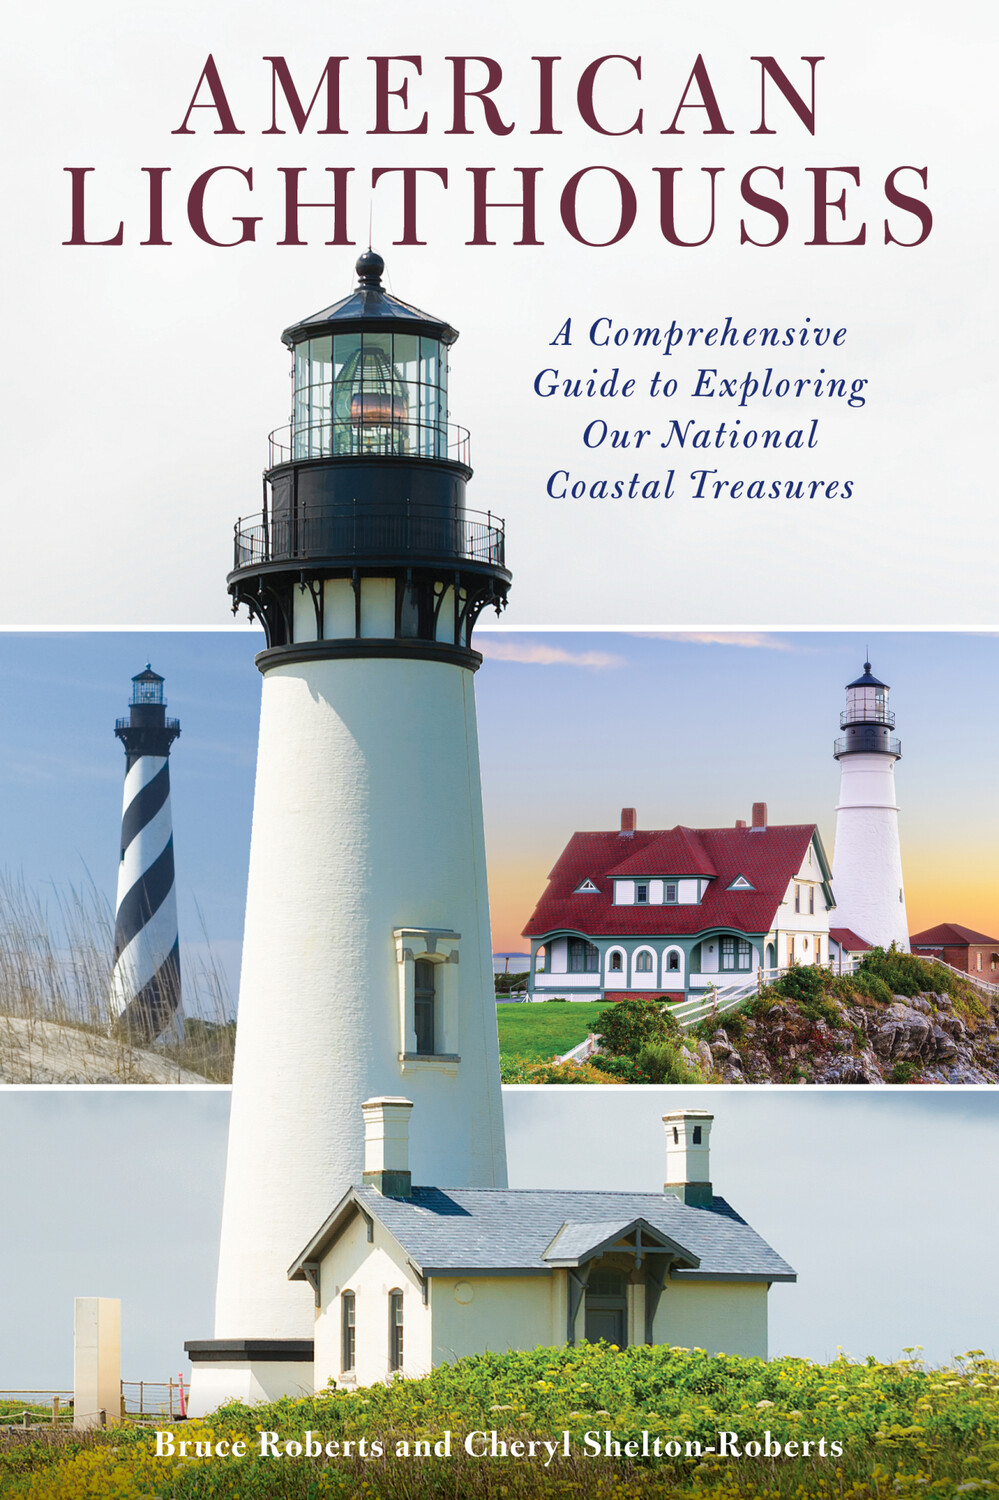 American Lighthouses: A Comprehensive Guide